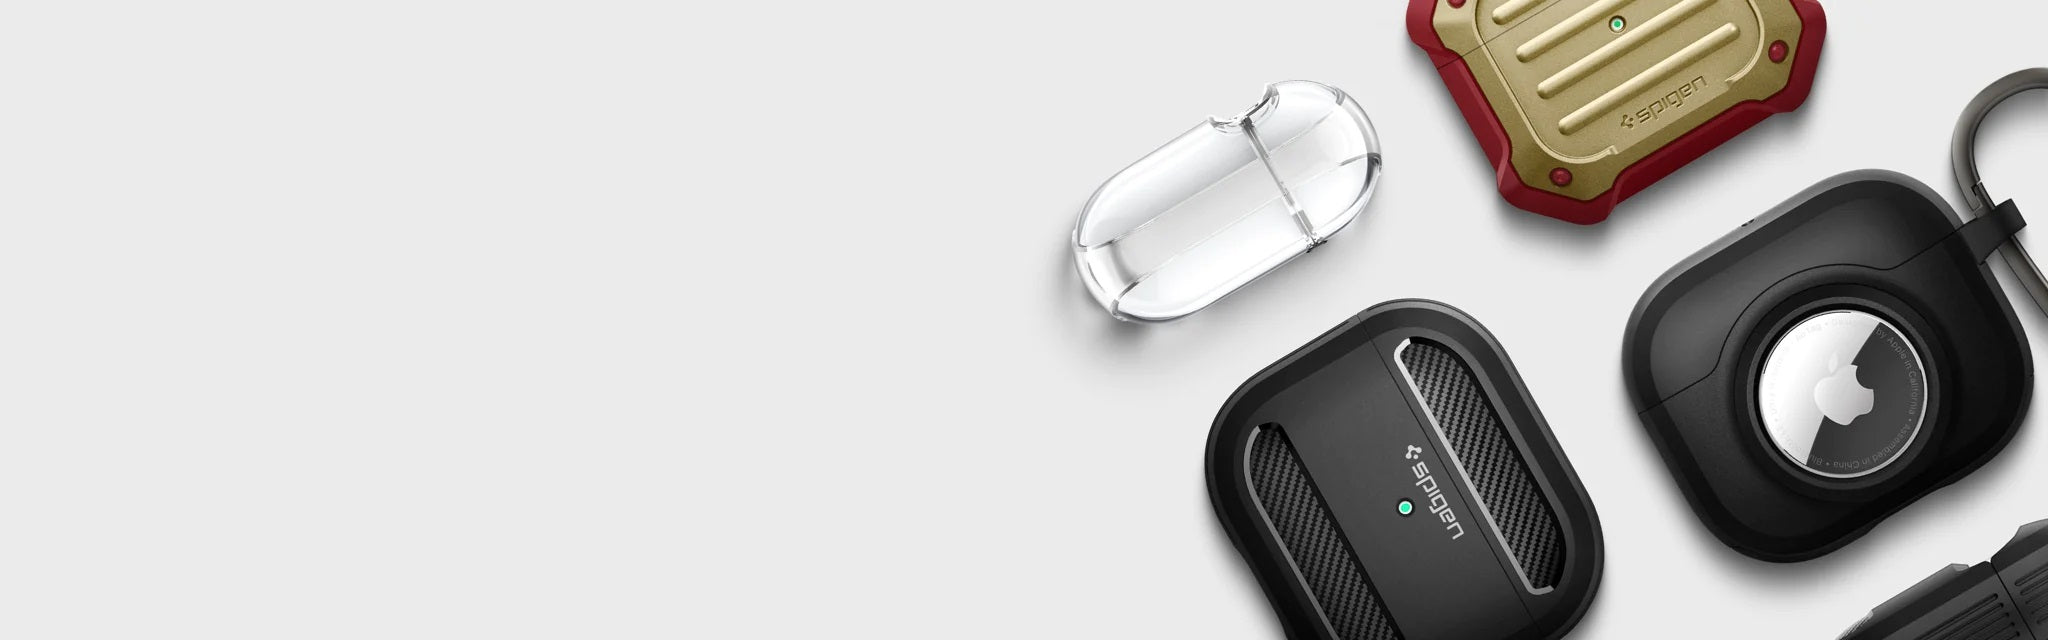 Spigen Rugged Armor Designed for Apple Airpods Pro Case Review